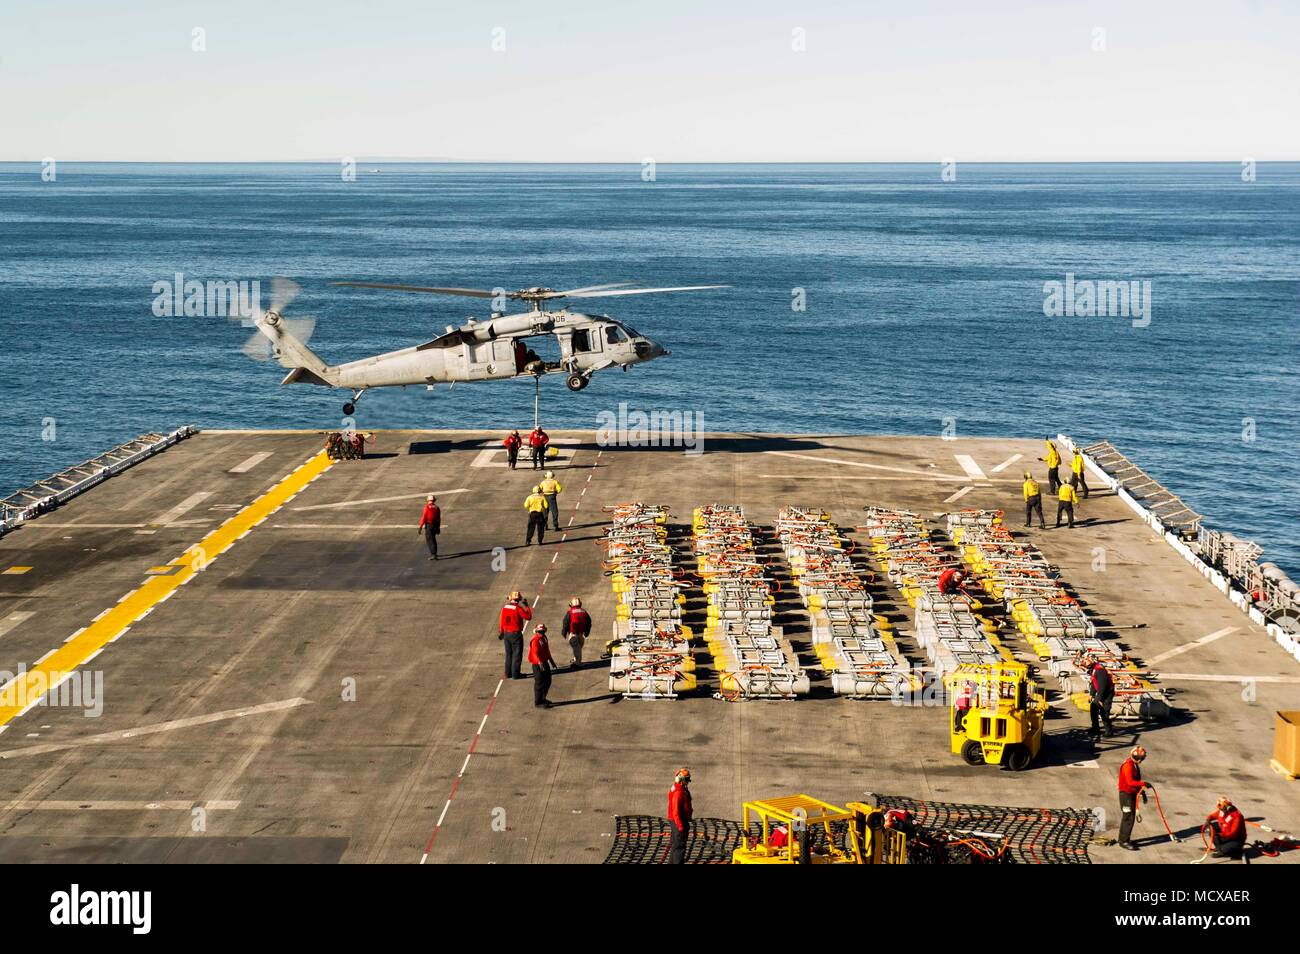 180305-N-ZS023-003  PACIFIC OCEAN (March 5, 2018) Sailors assigned to the amphibious assault ship USS America (LHA 6) attach ordnance to an MH-60S Sea Hawk helicopter assigned to the “Wildcards” of Helicopter Sea Combat Squadron (HSC) 23 on the flight deck. America is underway off the coast of southern California conducting an ammunitions offload prior to entering a planned maintenance availability period. (U.S. Navy photo by Mass Communication Specialist 3rd Class Vance Hand/Released) Stock Photo